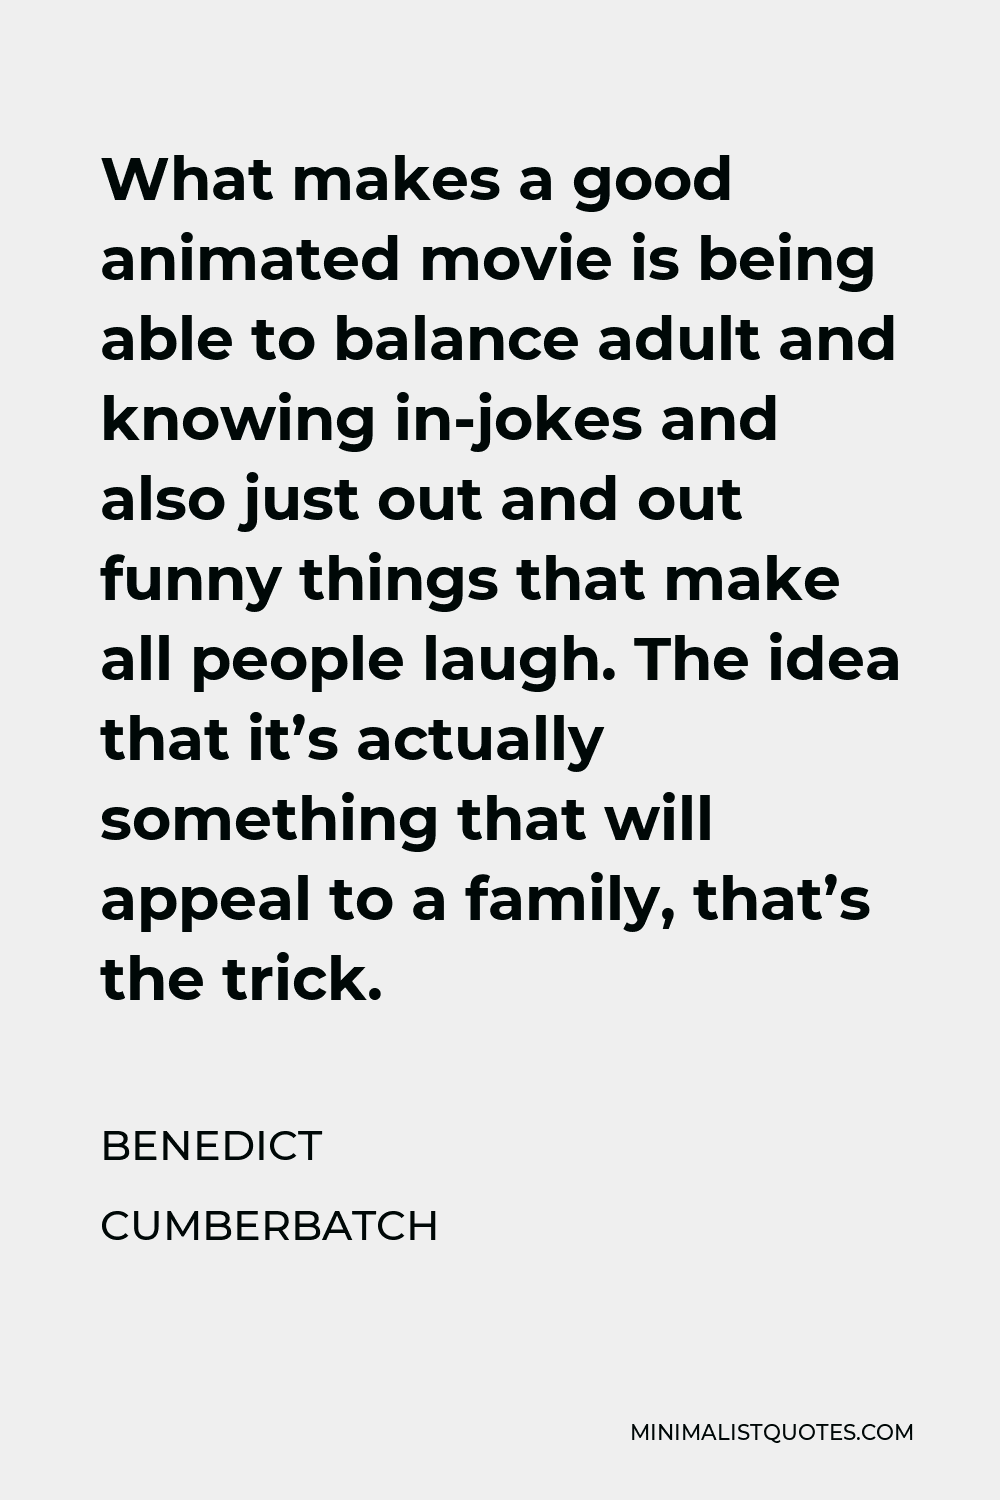 Benedict Cumberbatch Quote - What makes a good animated movie is being able to balance adult and knowing in-jokes and also just out and out funny things that make all people laugh. The idea that it’s actually something that will appeal to a family, that’s the trick.